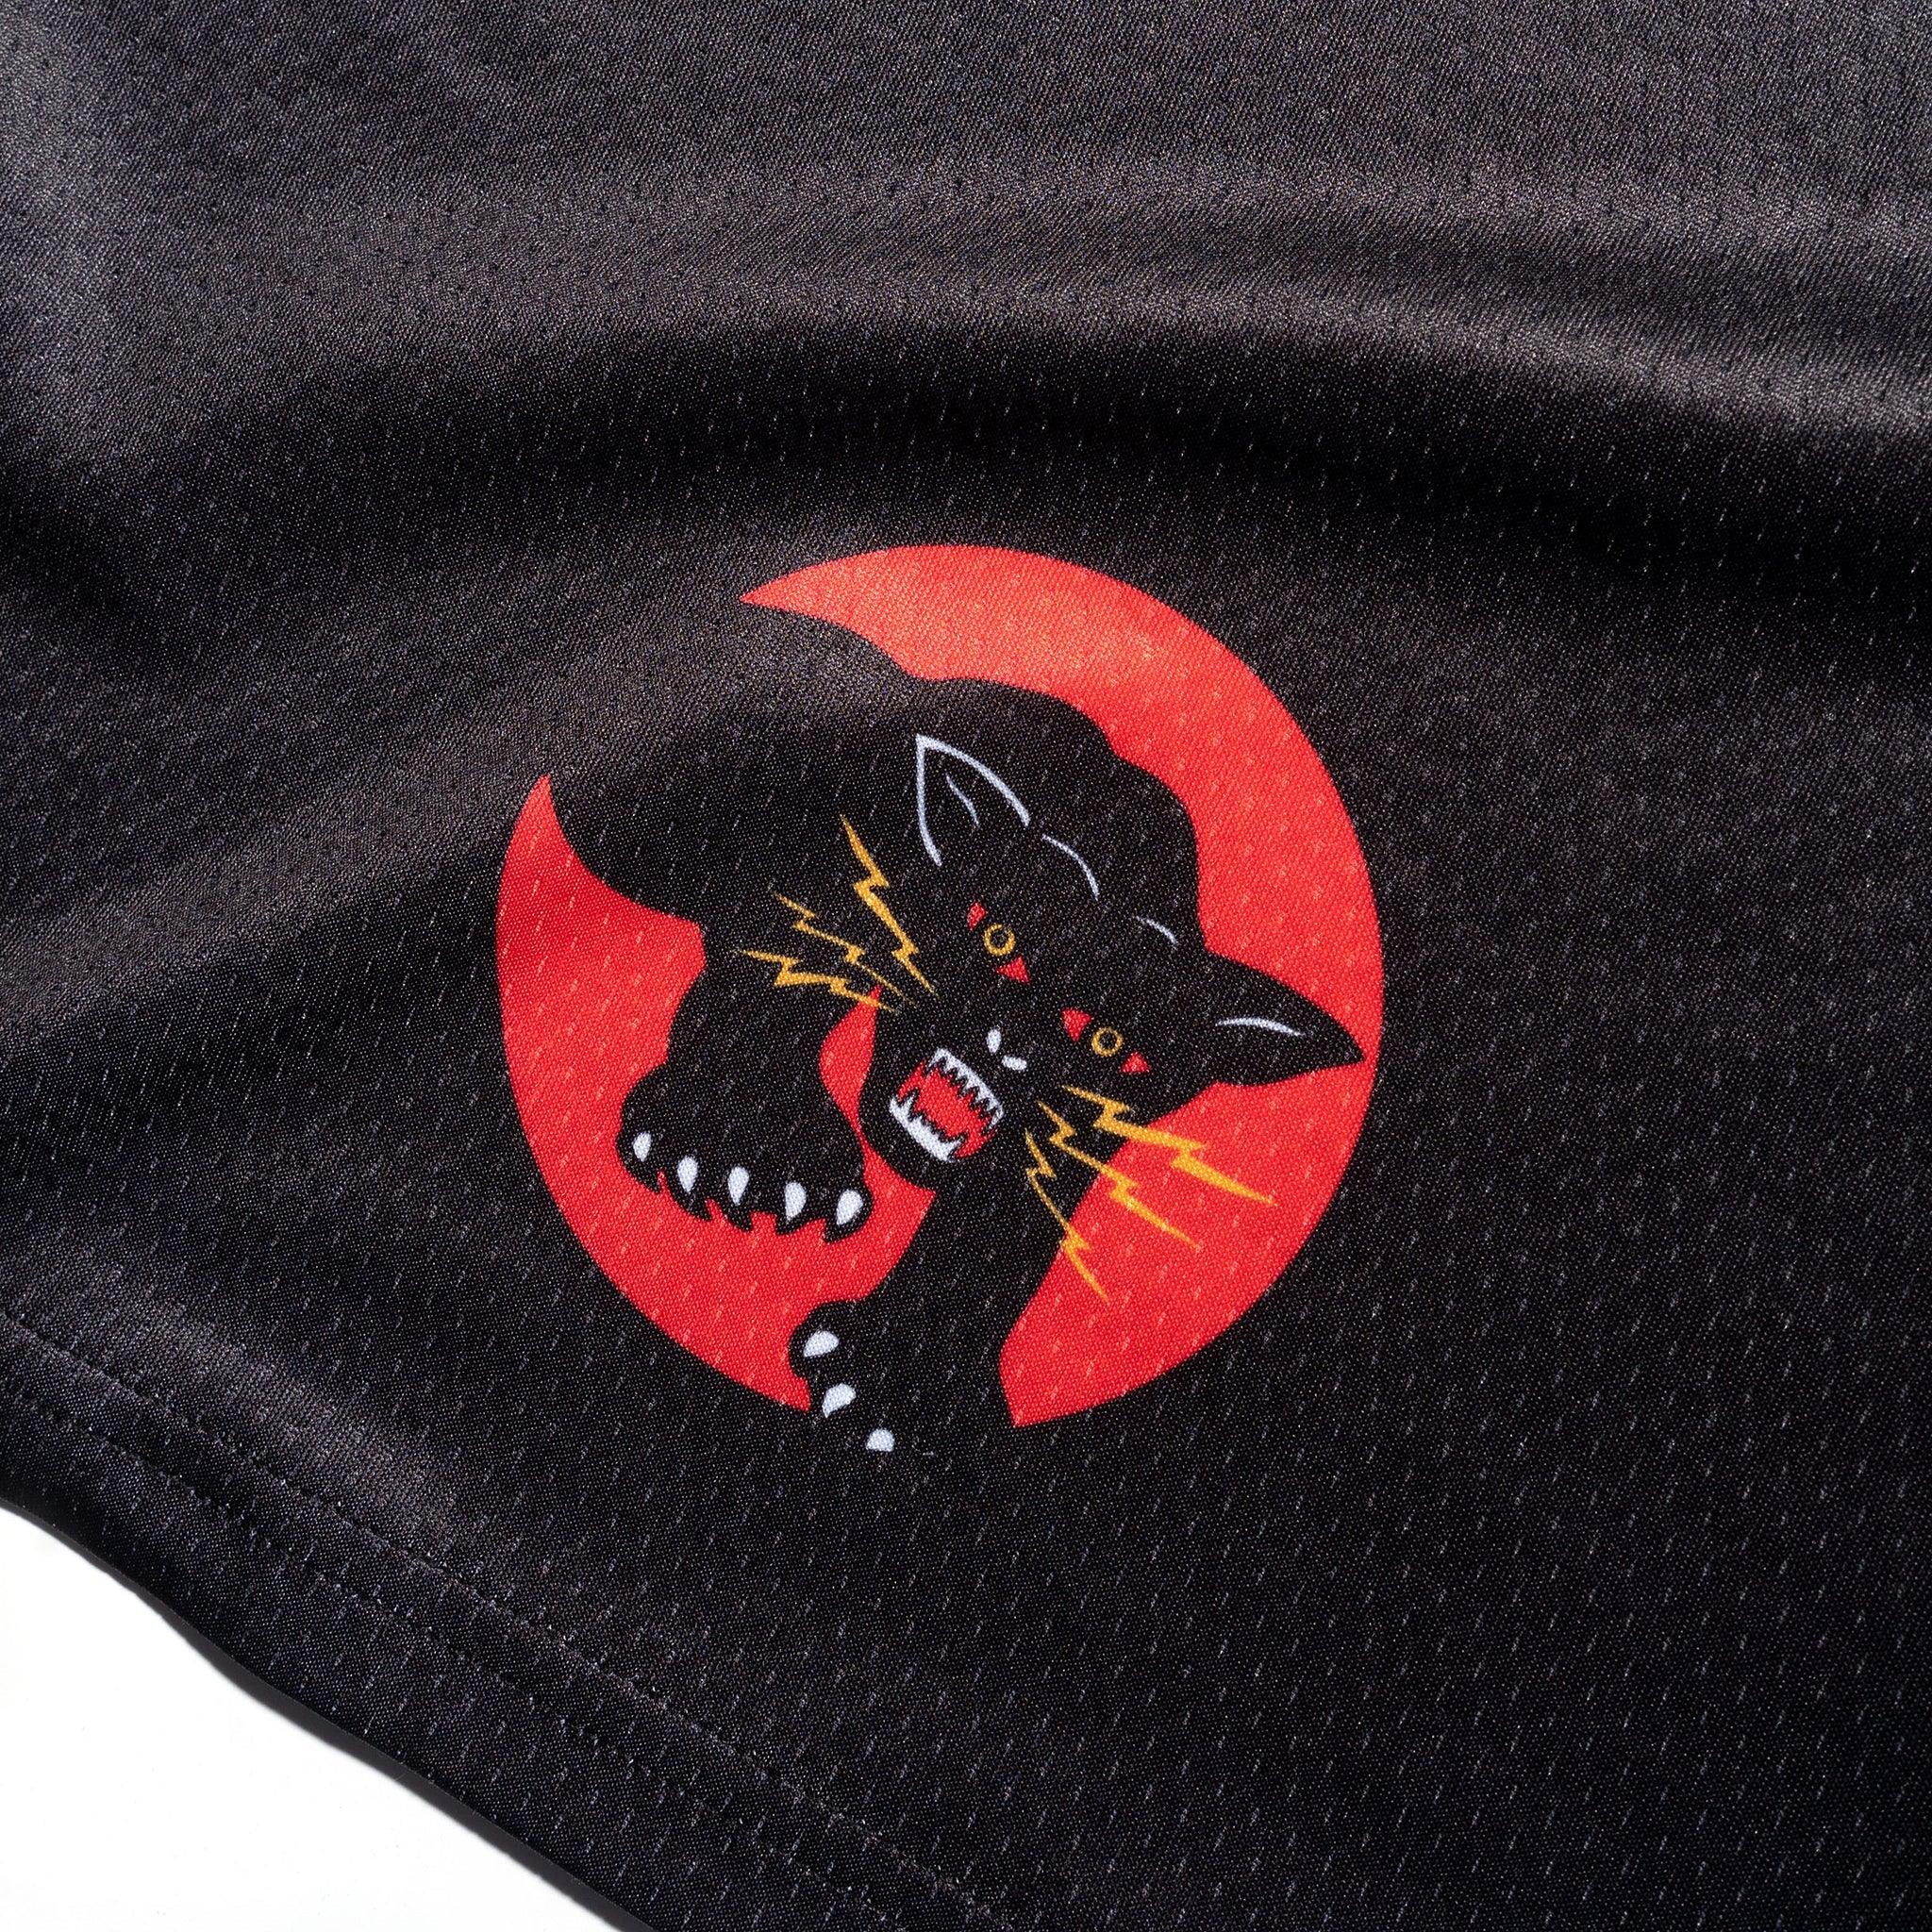 Against Lab x Dominate Patch Mesh Jersey Black !